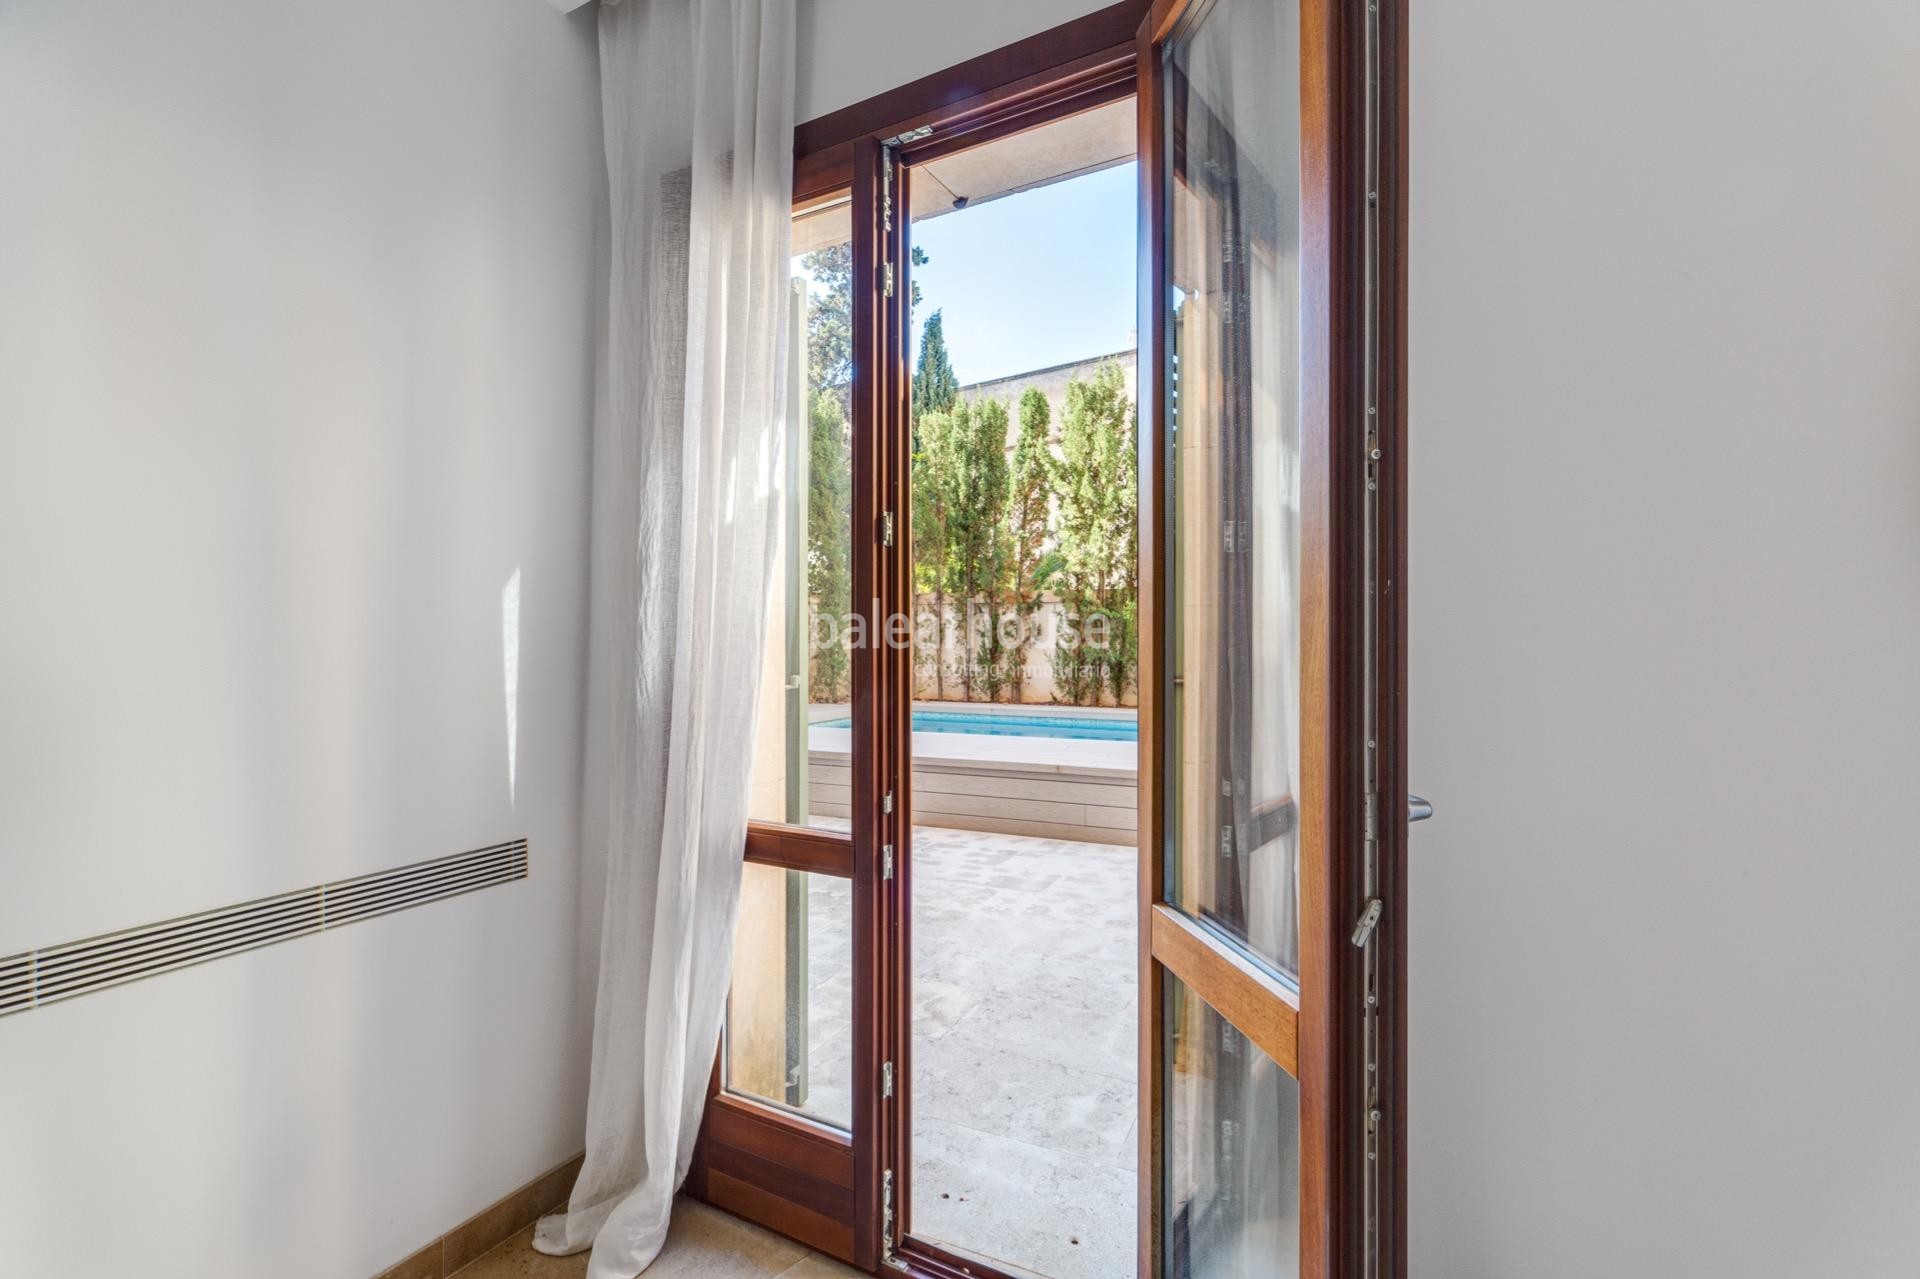 Excellent large designer duplex with terrace and pool in the spectacular historic centre of Palma